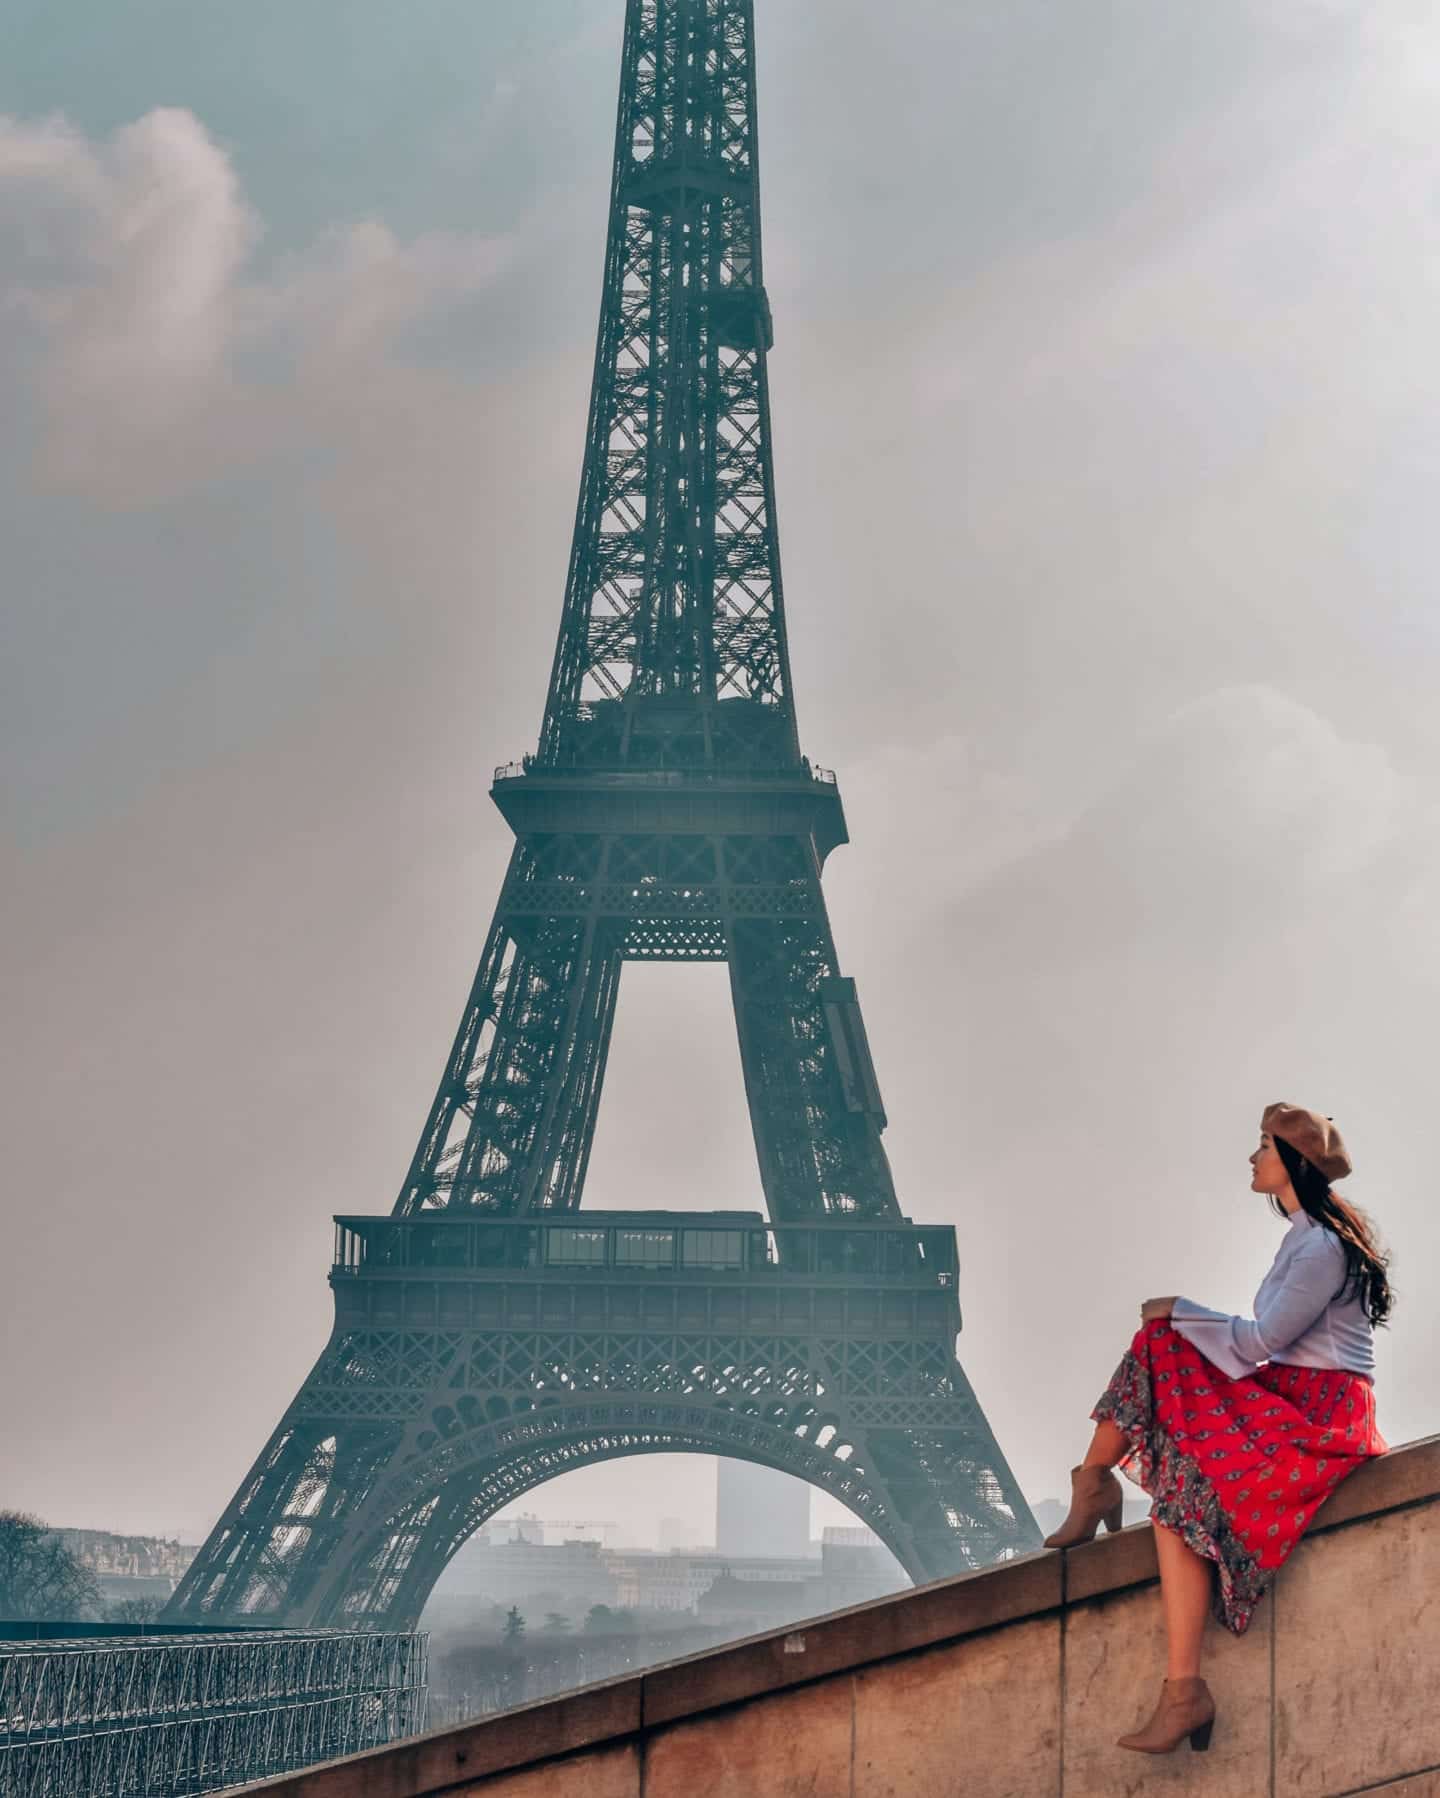 The Eiffel Tower Photography Guide — brotherside • Next Level Visuals